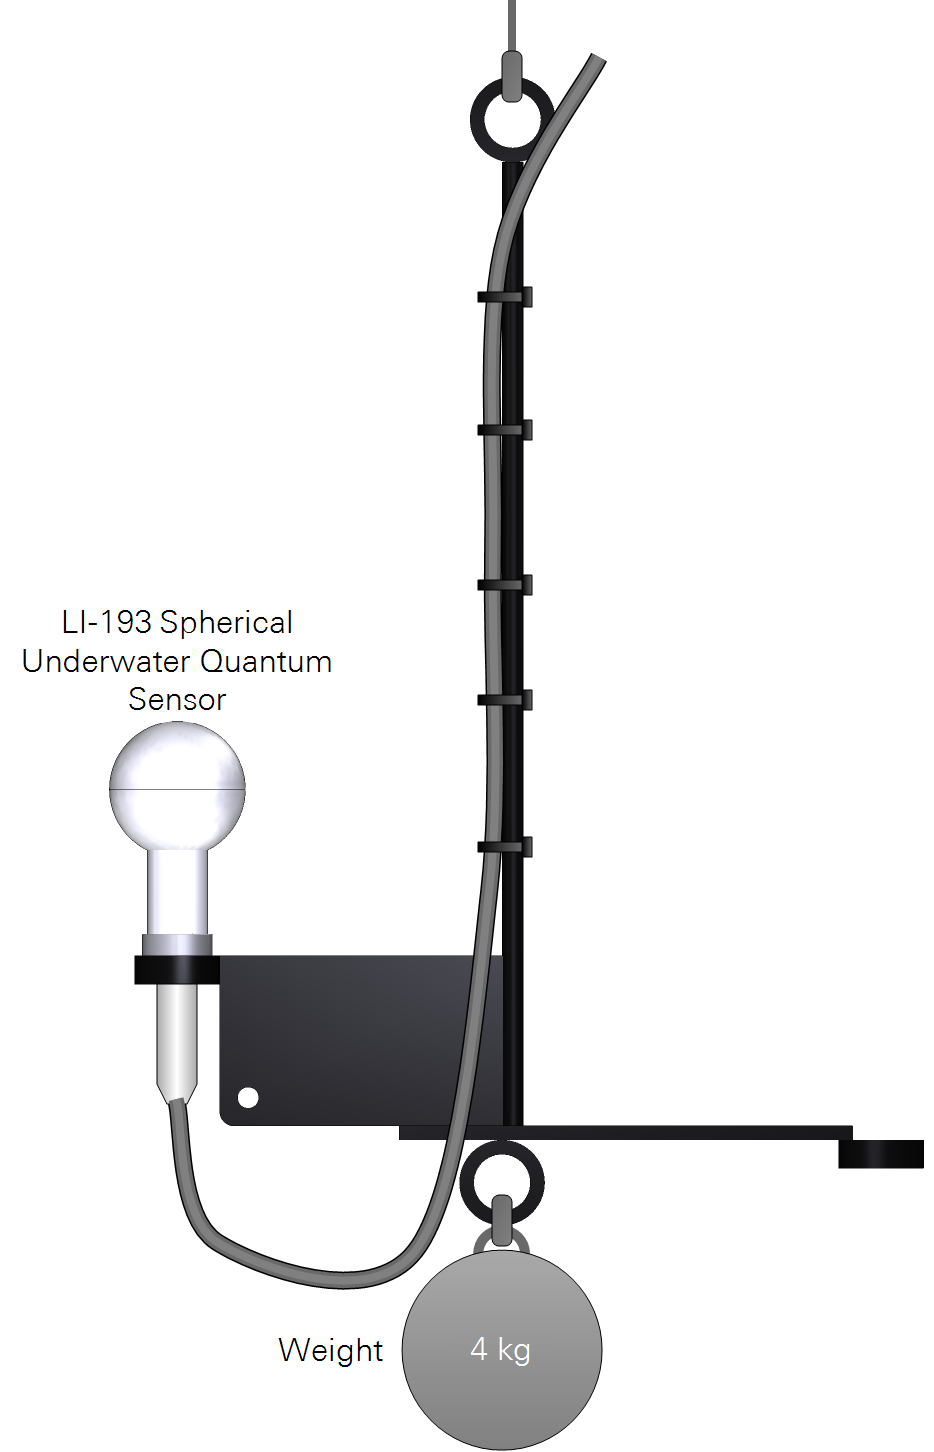 If only one LI-193 is attacted, a small weight can help lower the frame through a water column.